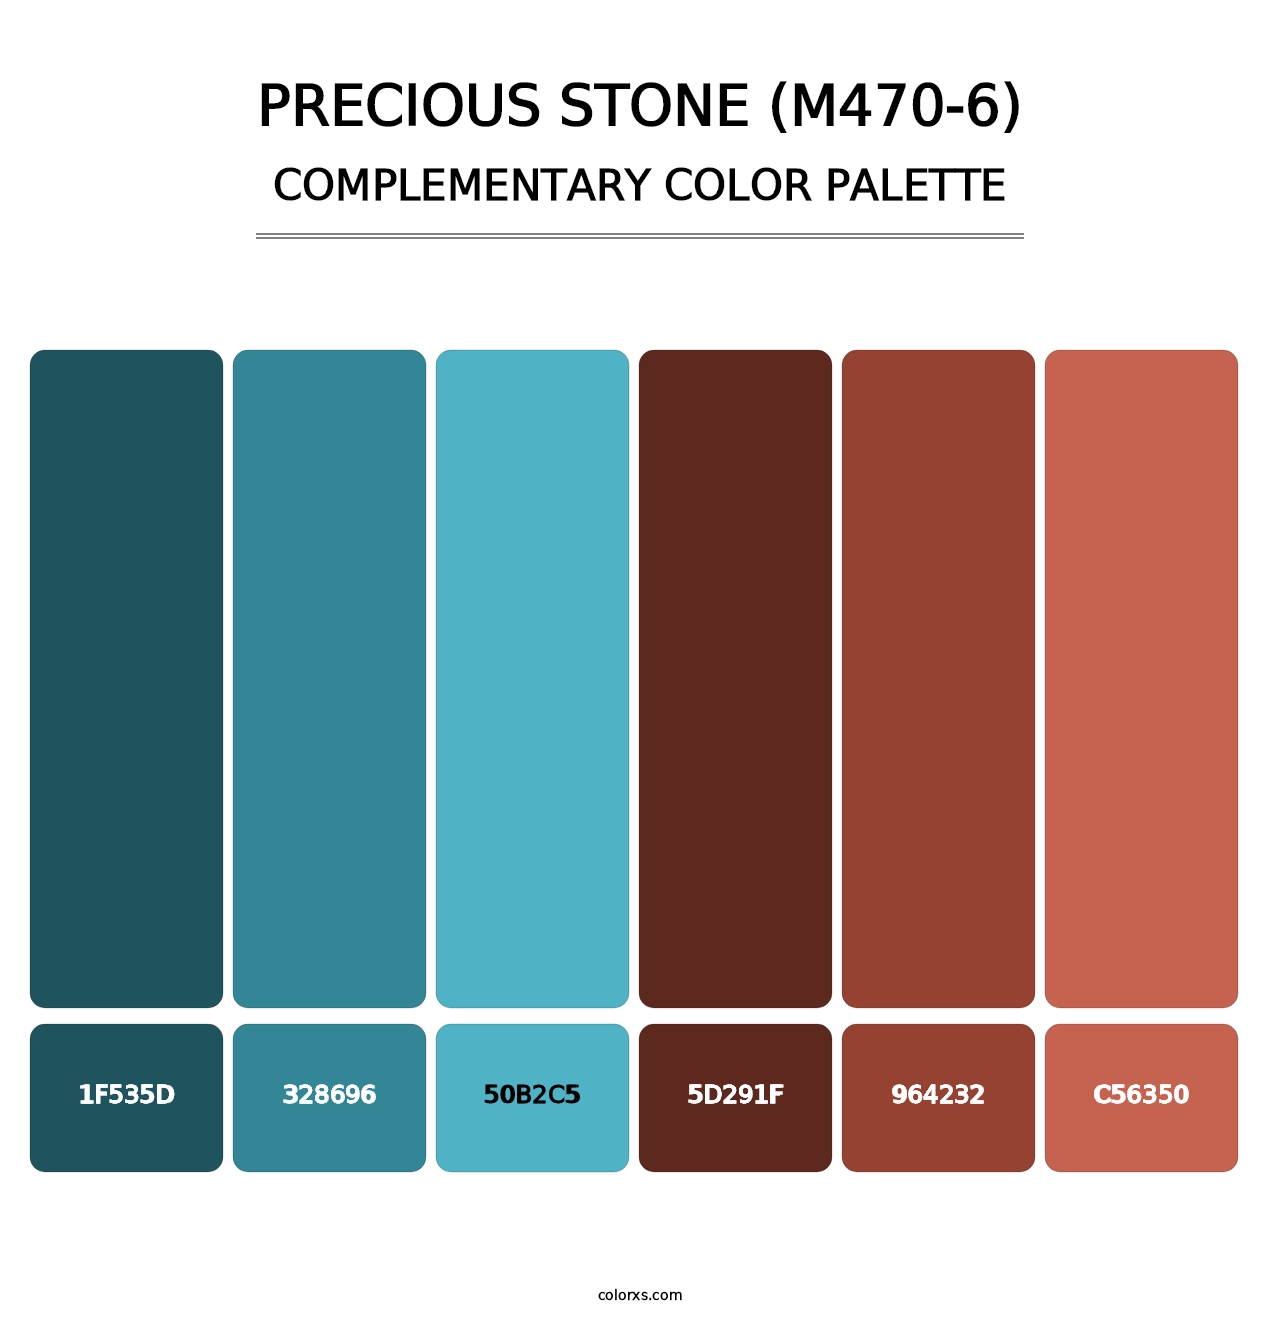 Precious Stone (M470-6) - Complementary Color Palette